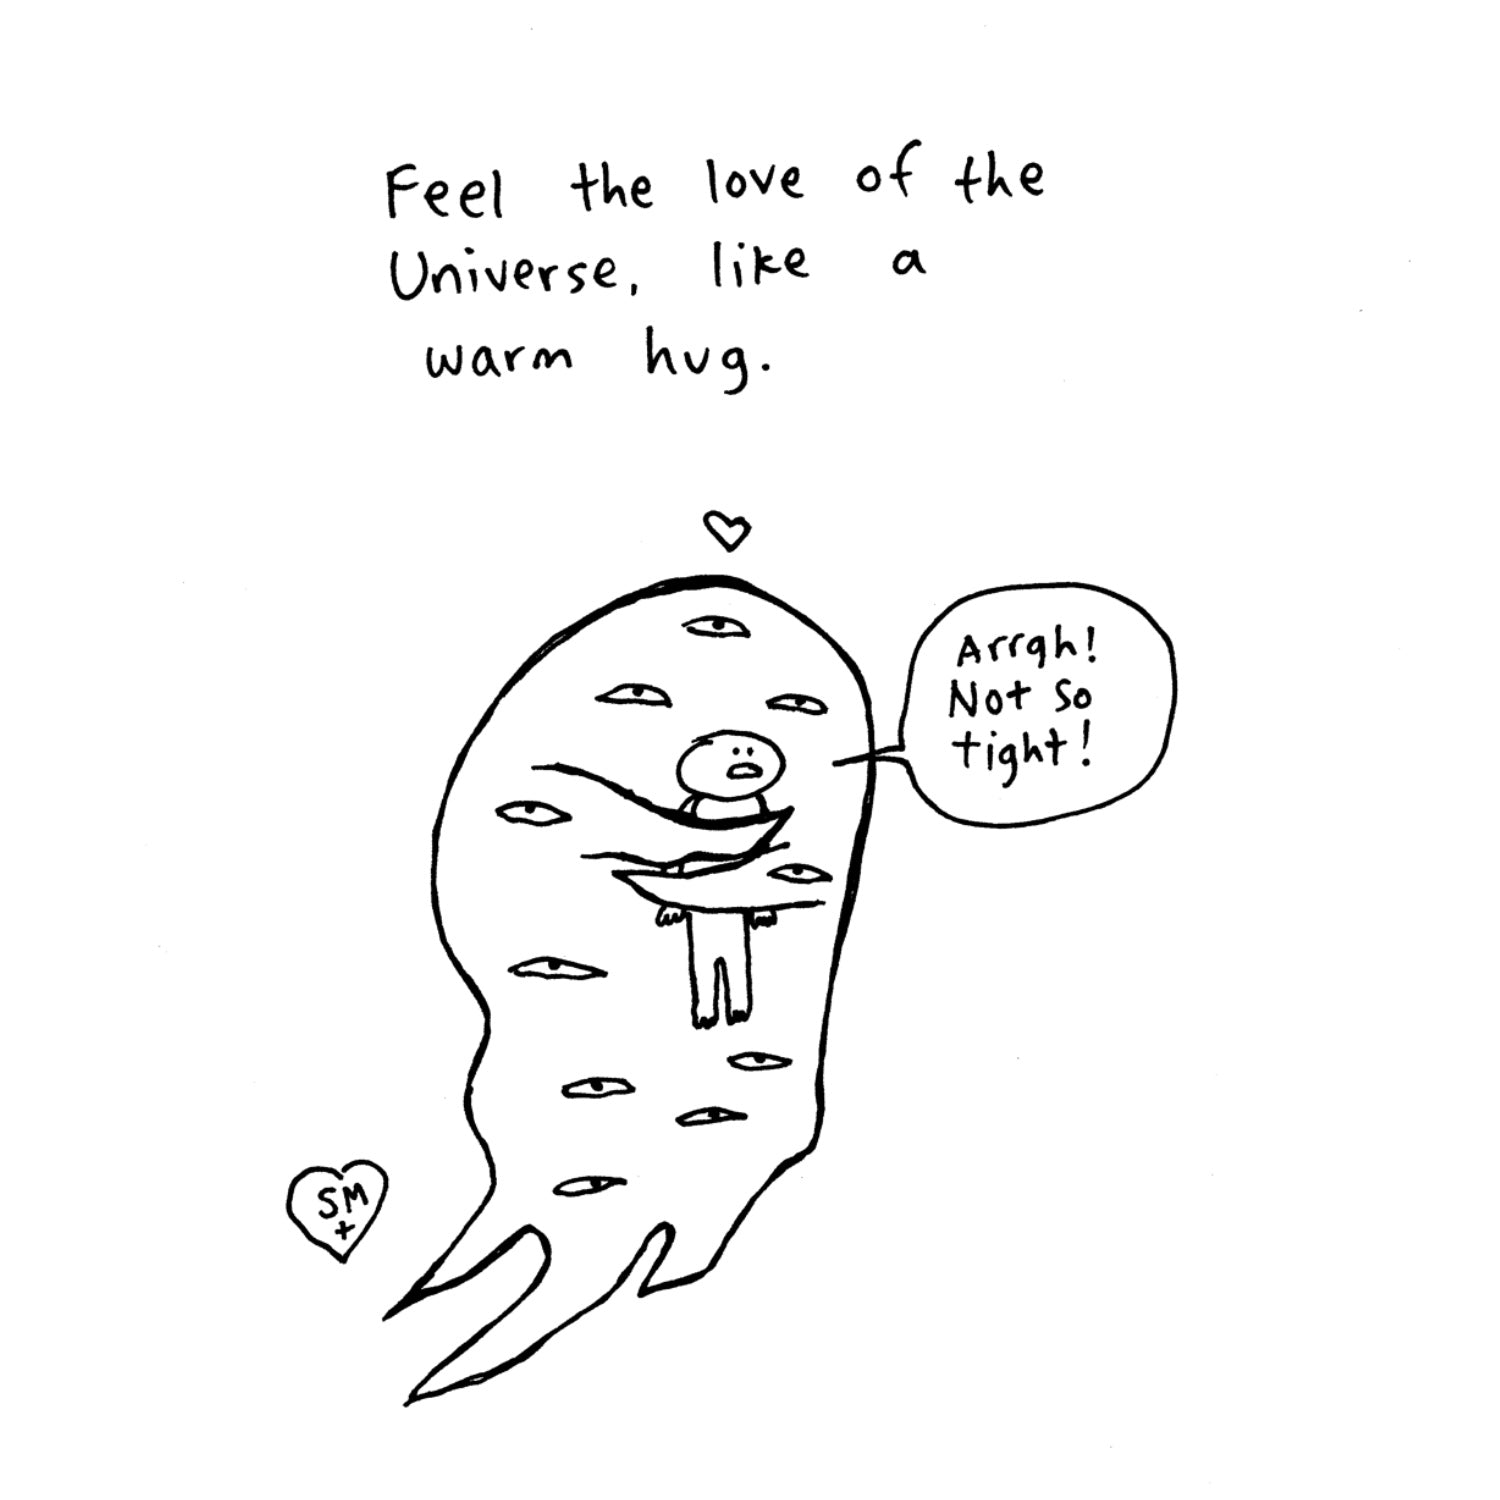 A Warm Hug from the Universe